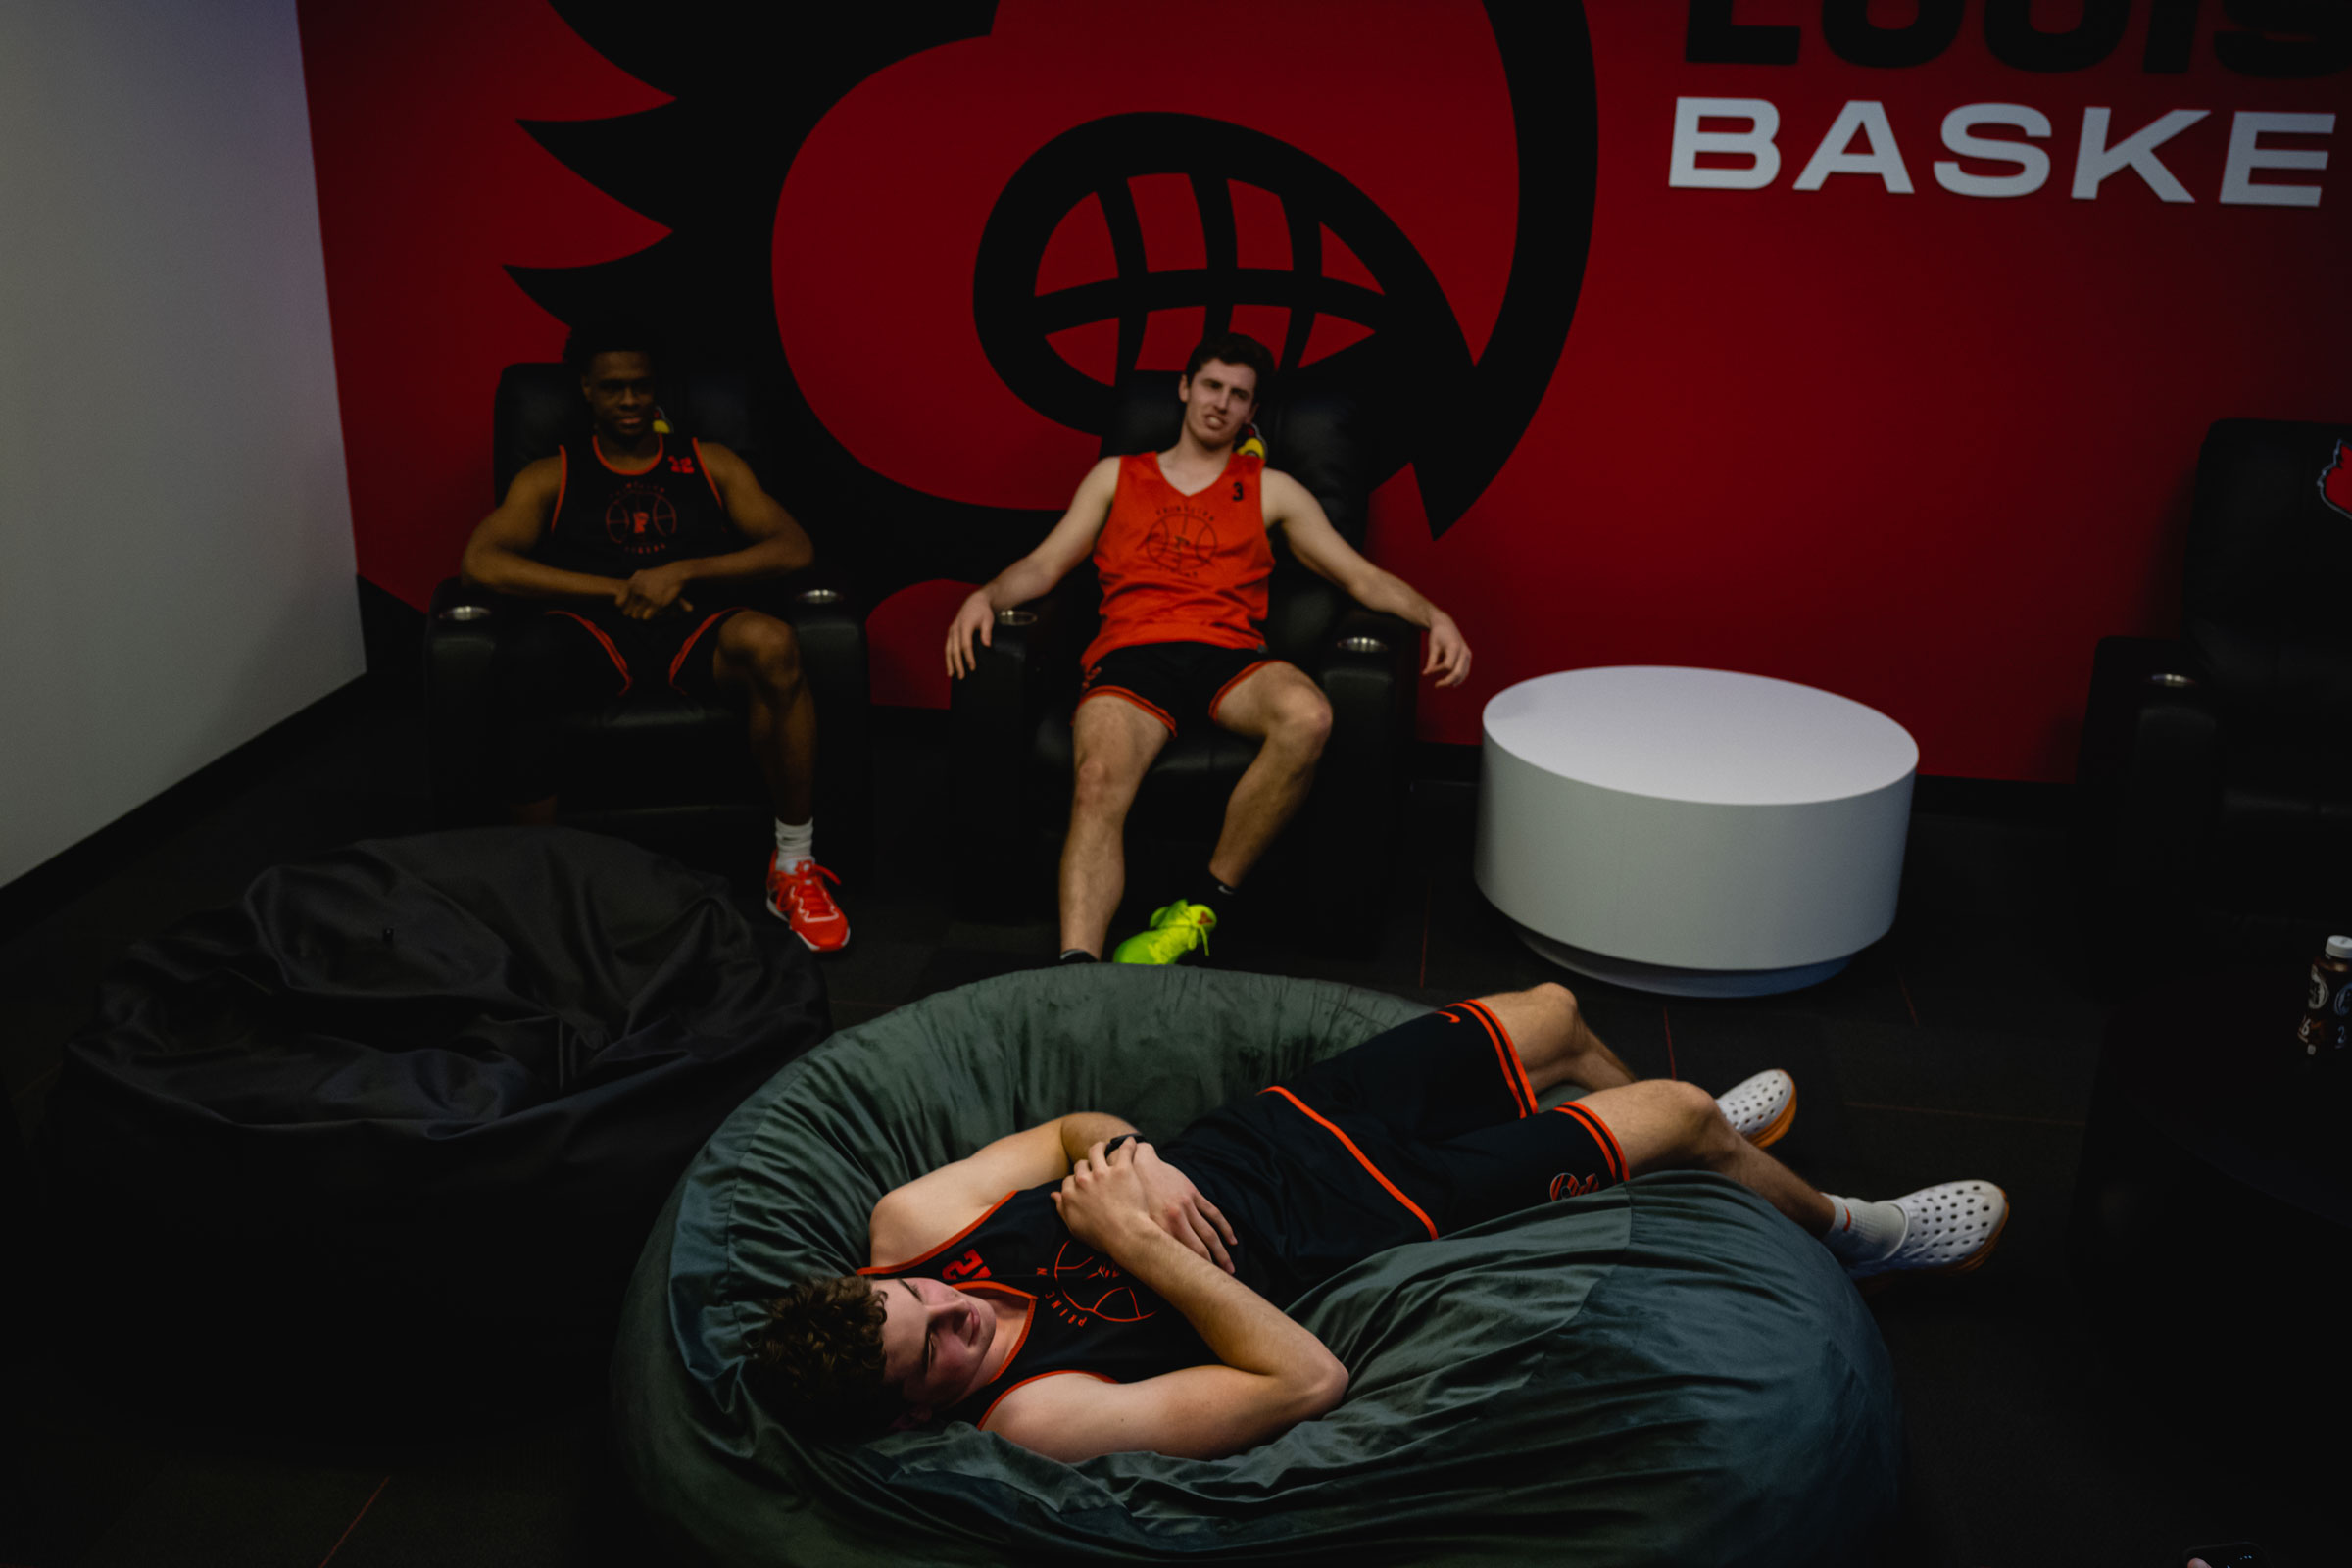 Keeshawn Kellman, Ryan Langborg, and Caden Pierce relax in a player's lounge at the KFC YUM! Center in Louisville, Kentucky on March 23, 2023.